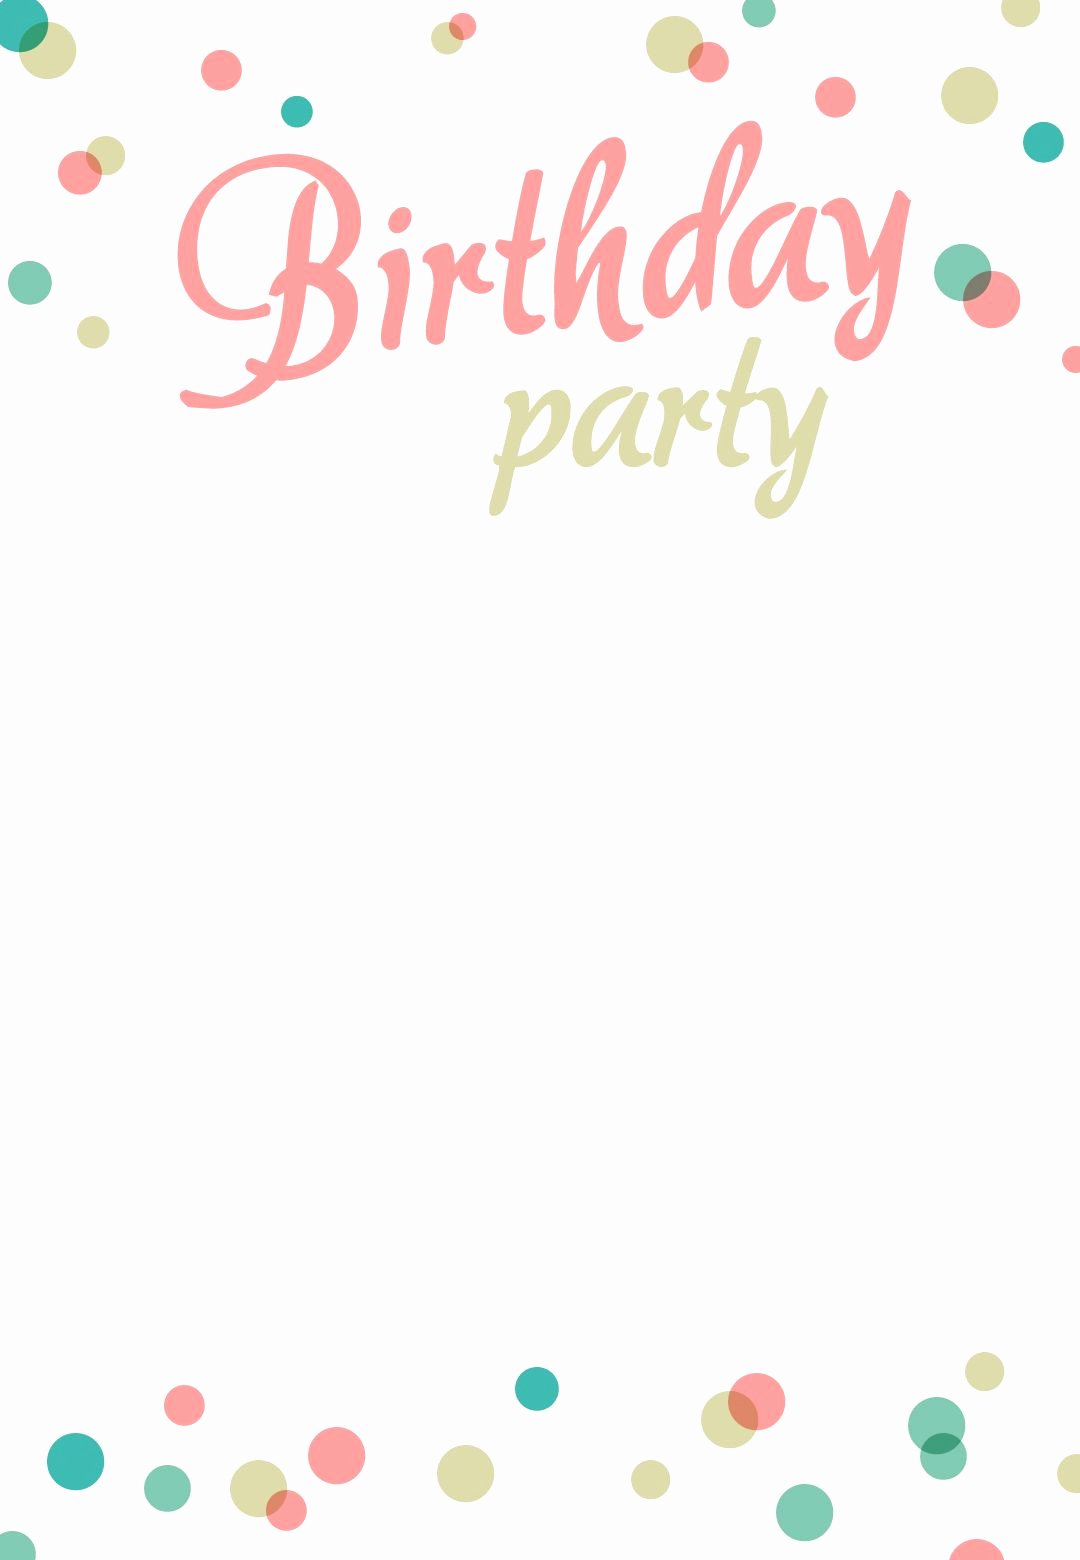 Birthday Party Template Word Beautiful Birthday Party Invitation Free Printable